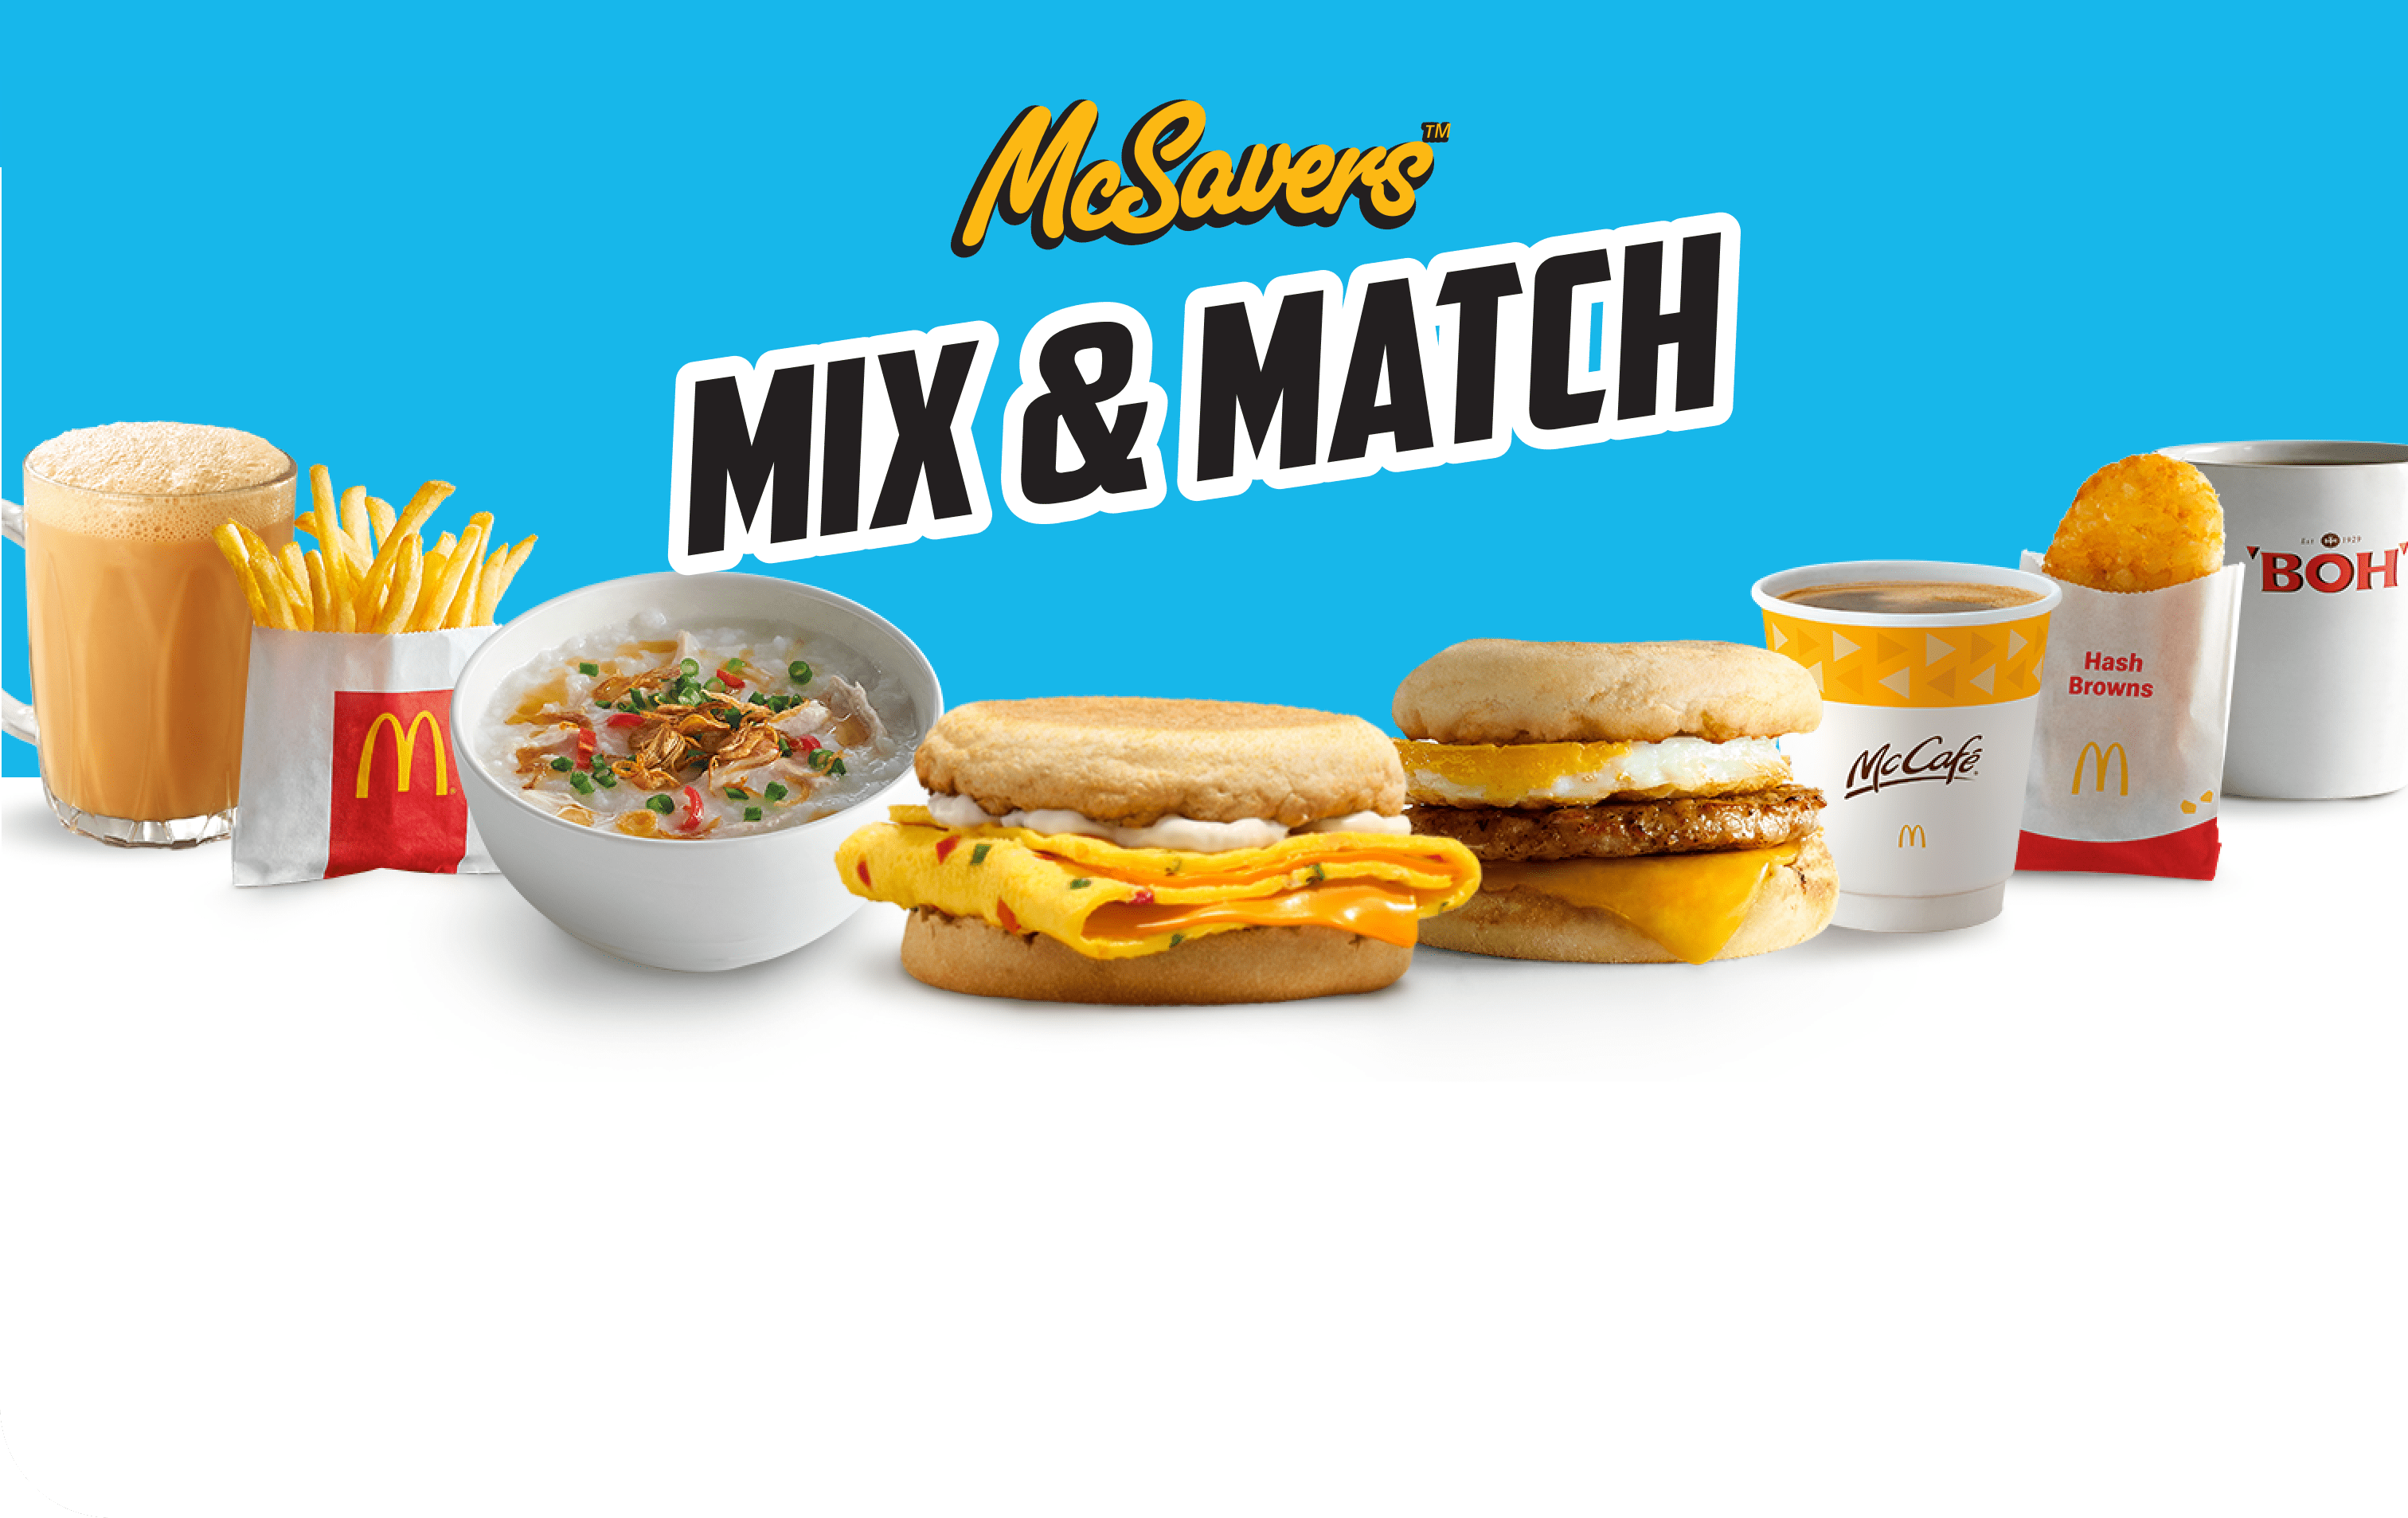 Pick and choose to satisfy your cravings with more value from McSavers Mix & Match